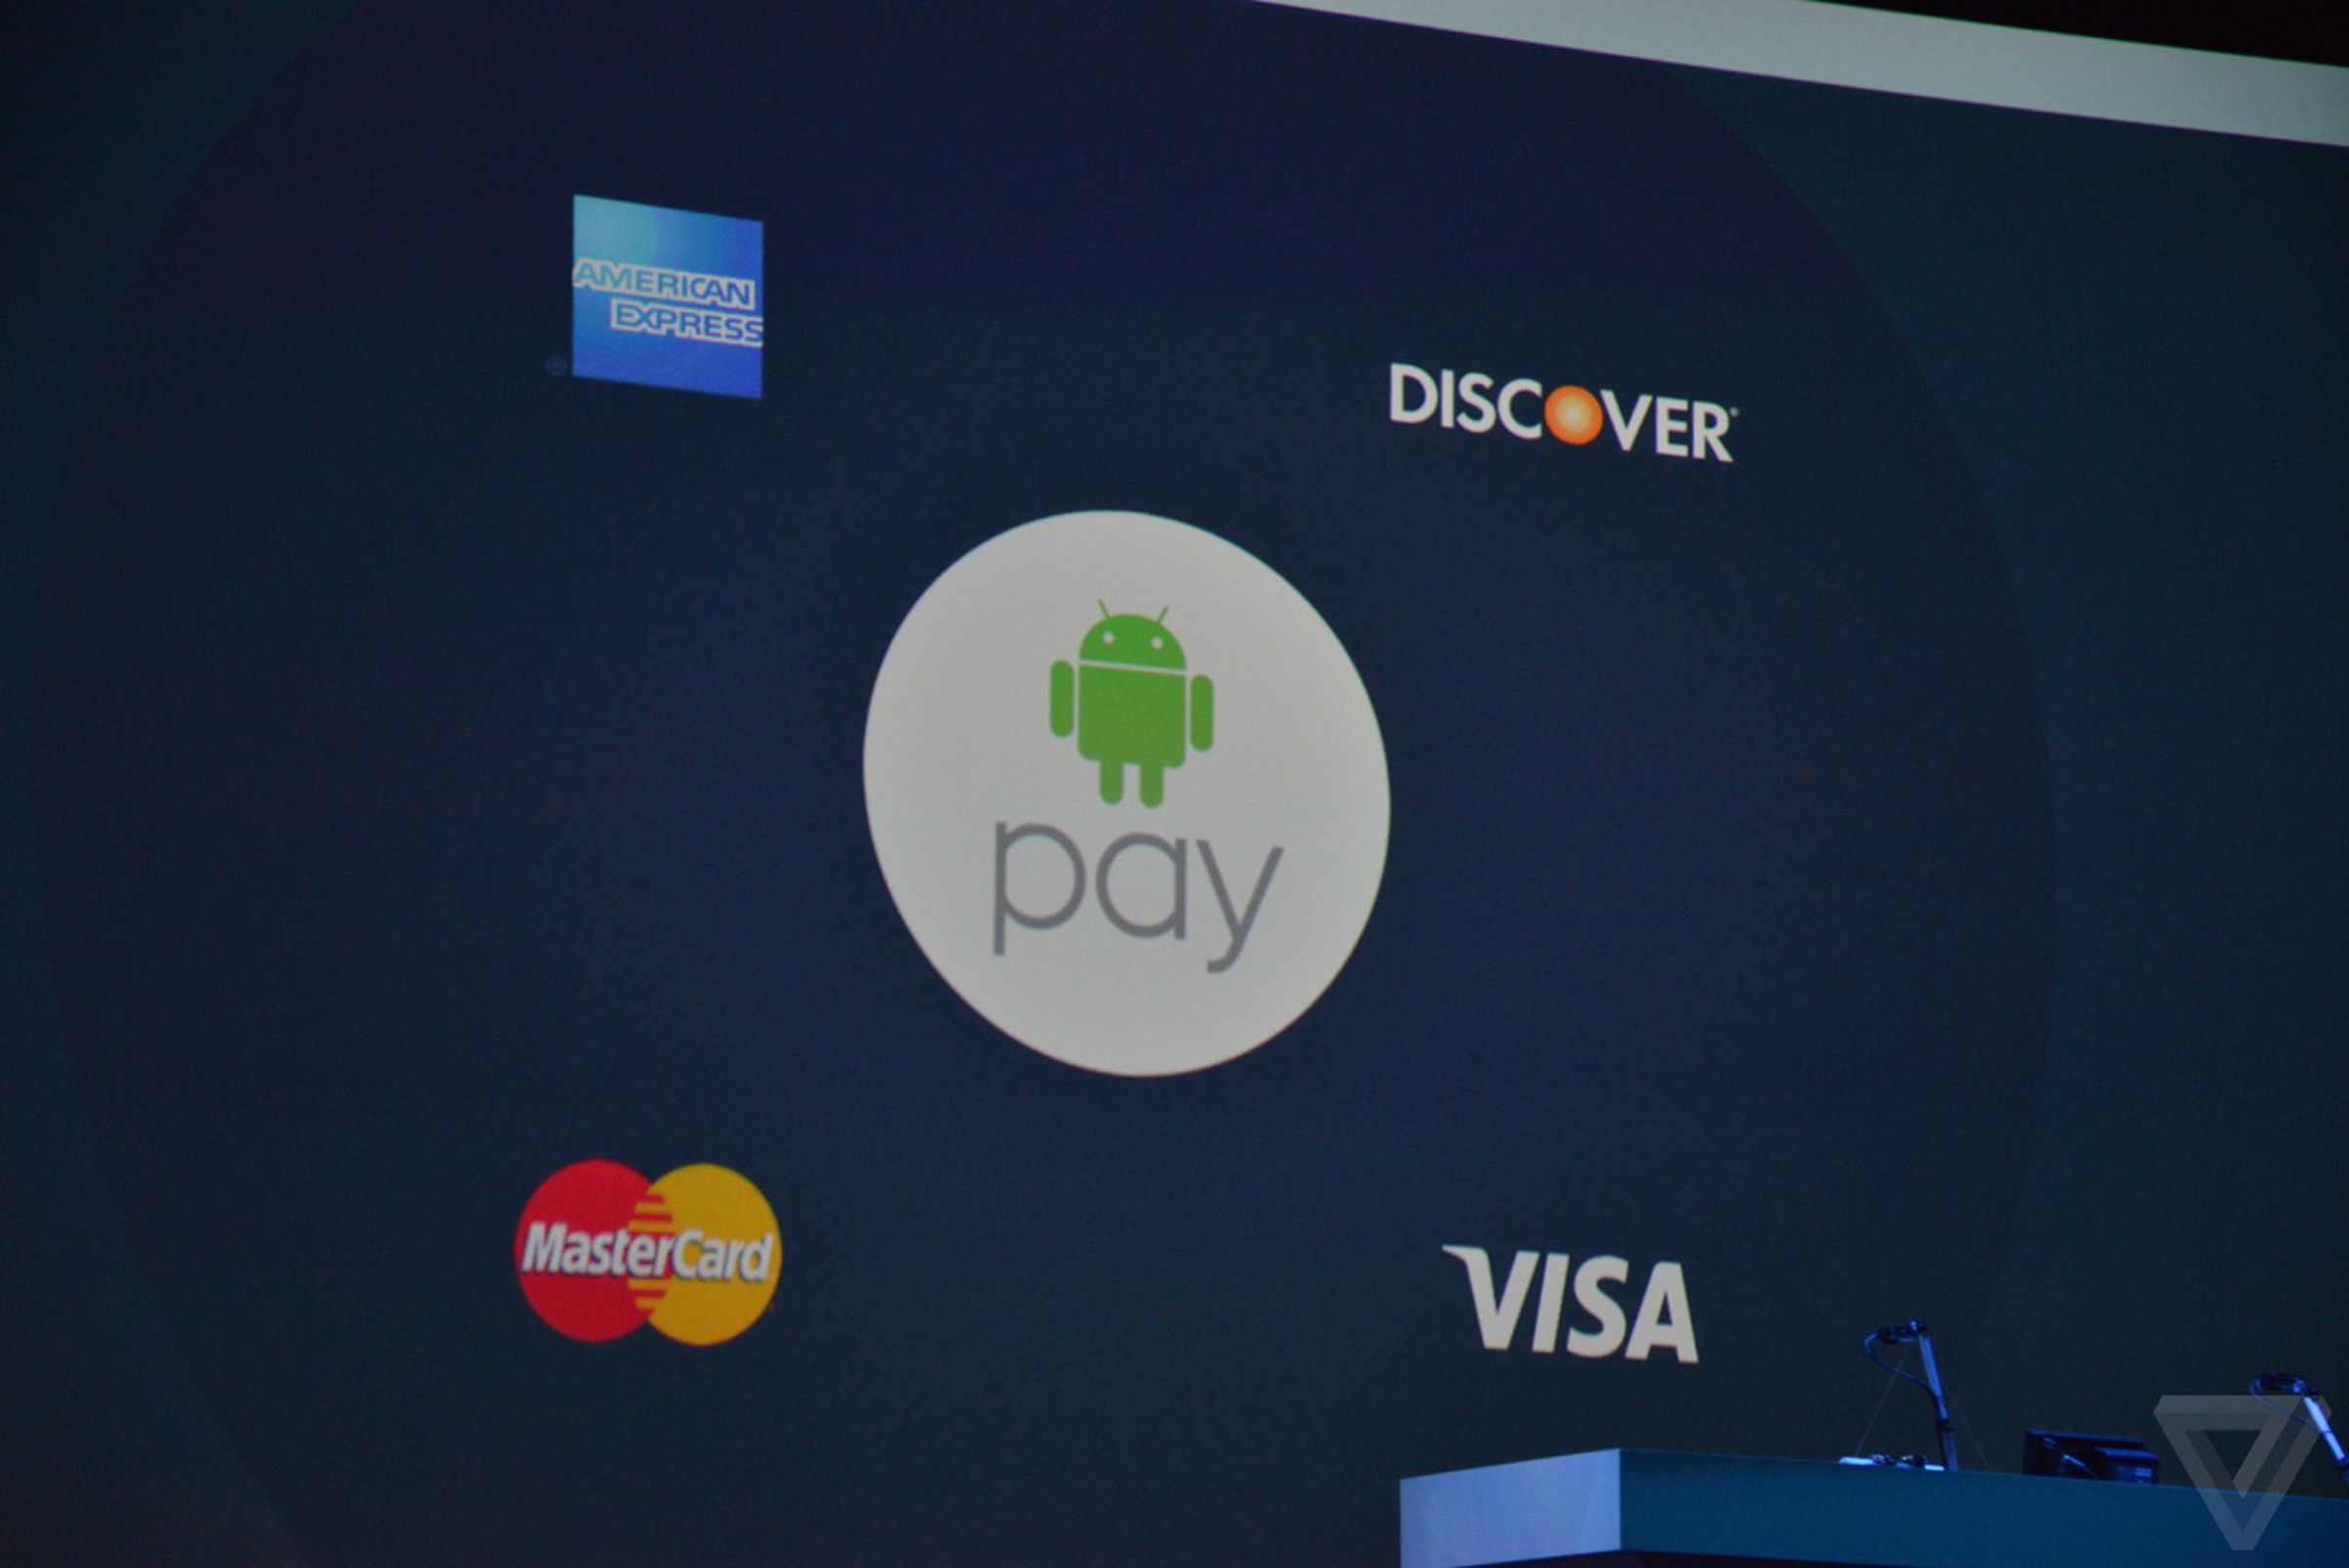 Android Pay announcement photos